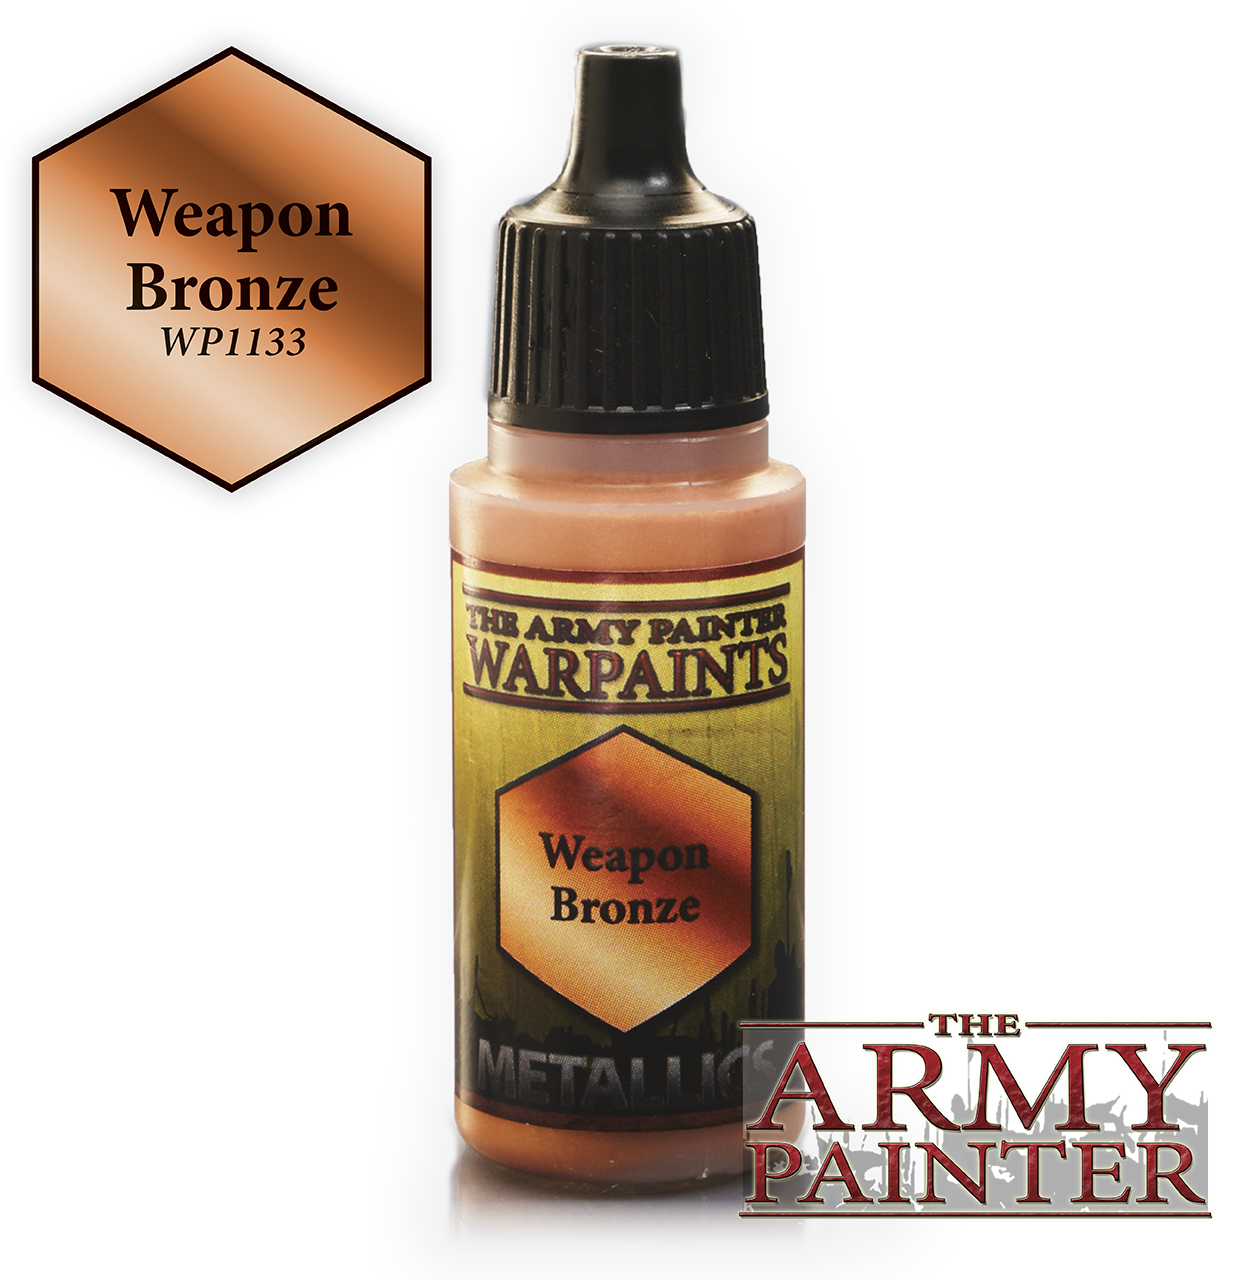 The ARMY PAINTER: Metallics Warpaints - Weapon Bronze | Tacoma Games